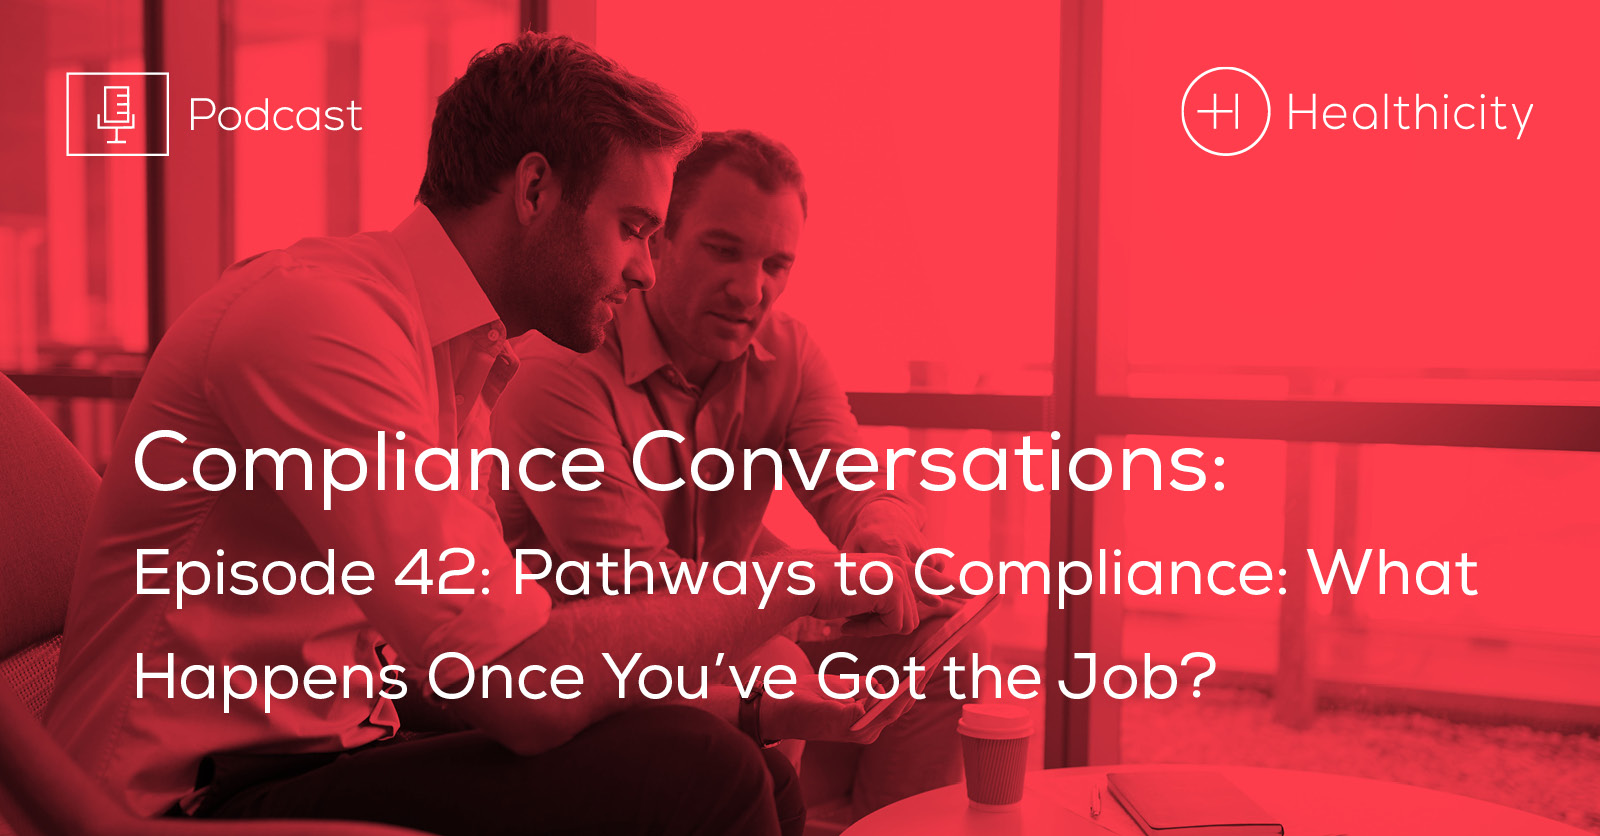 Listen to the Episode - Pathways to Compliance: What Happens Once You’ve Got the Job?